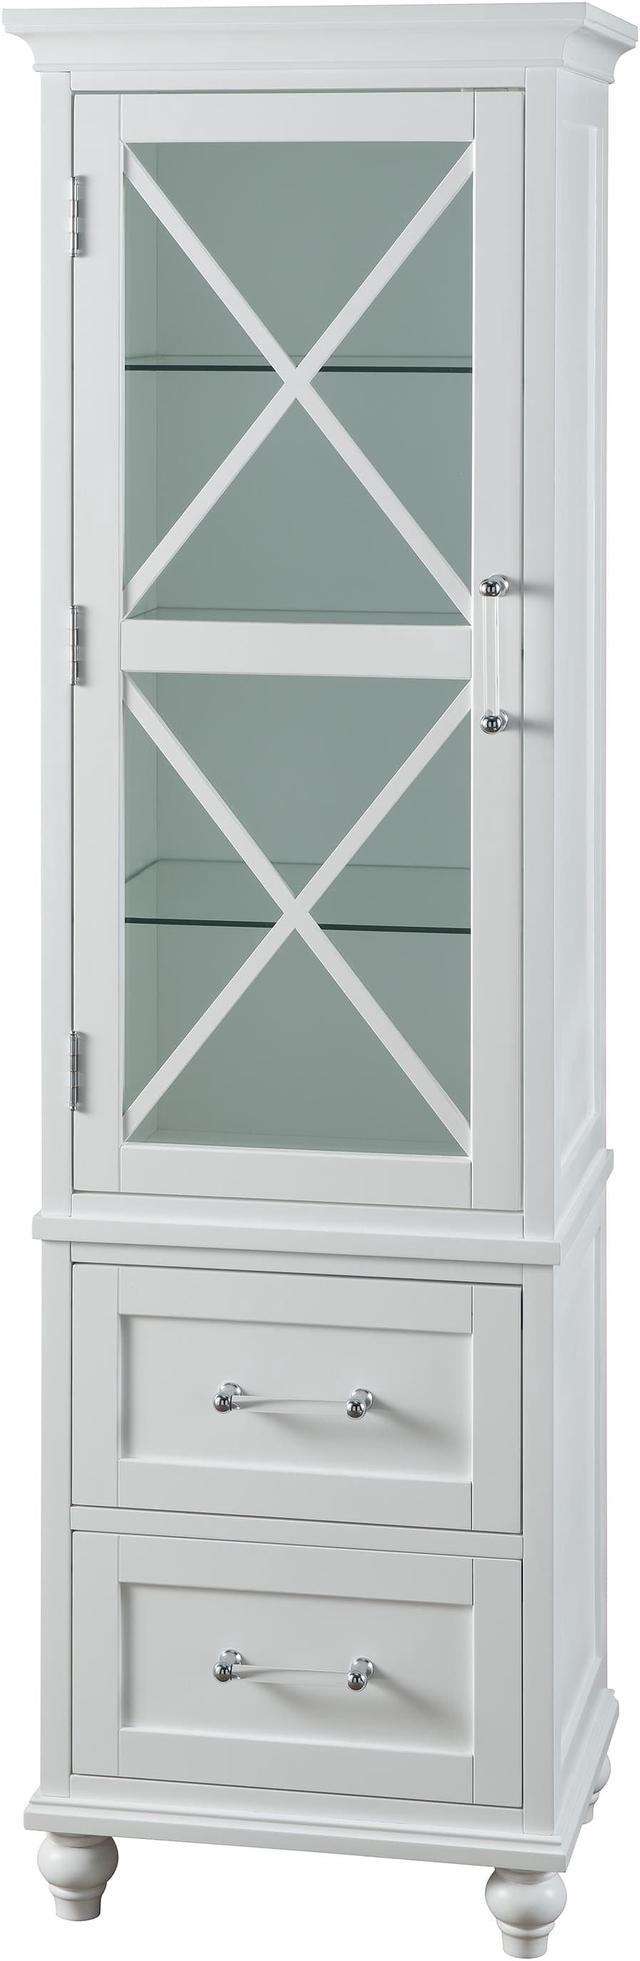 Teamson Home Blue Ridge 60 In Tall Linen Storage Cabinet With 2 Drawers 3 Adjule Glass Shelves For A Stylish Solution Bathrooms Kitchens Or Living Room White Newegg Com